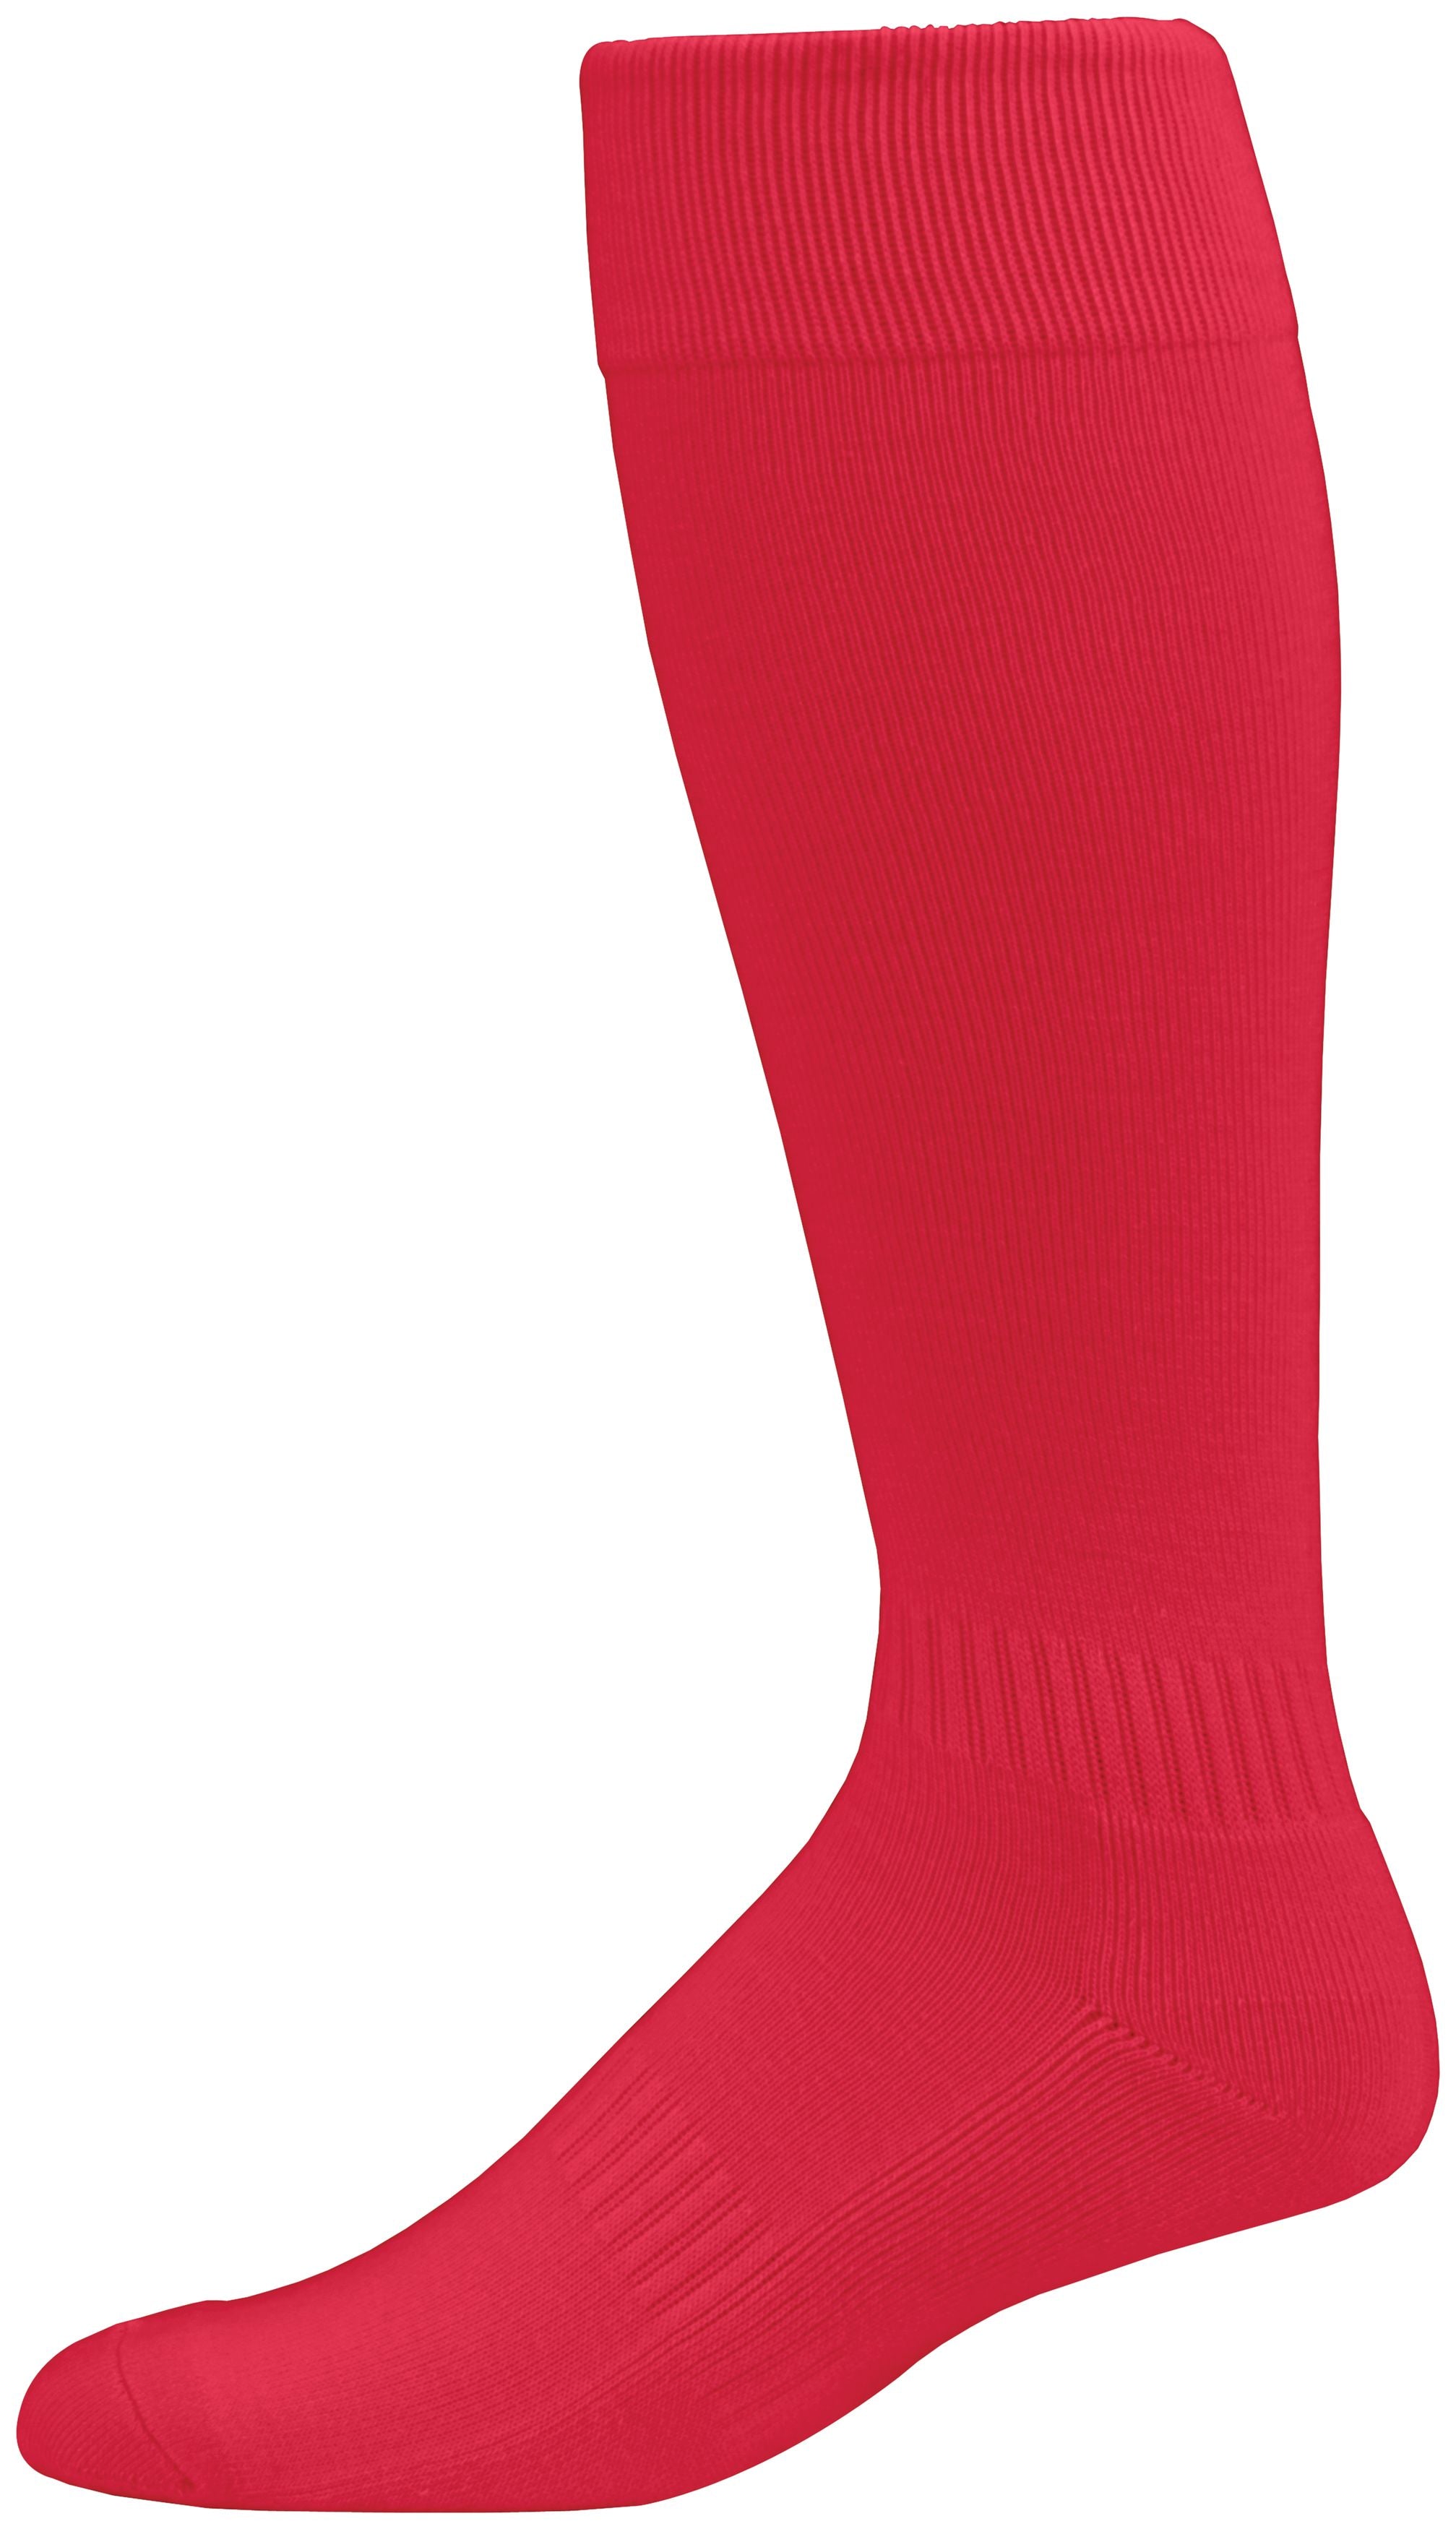 Augusta Sportswear Elite Multi-Sport Sock in Red  -Part of the Accessories, Augusta-Products, Accessories-Socks product lines at KanaleyCreations.com